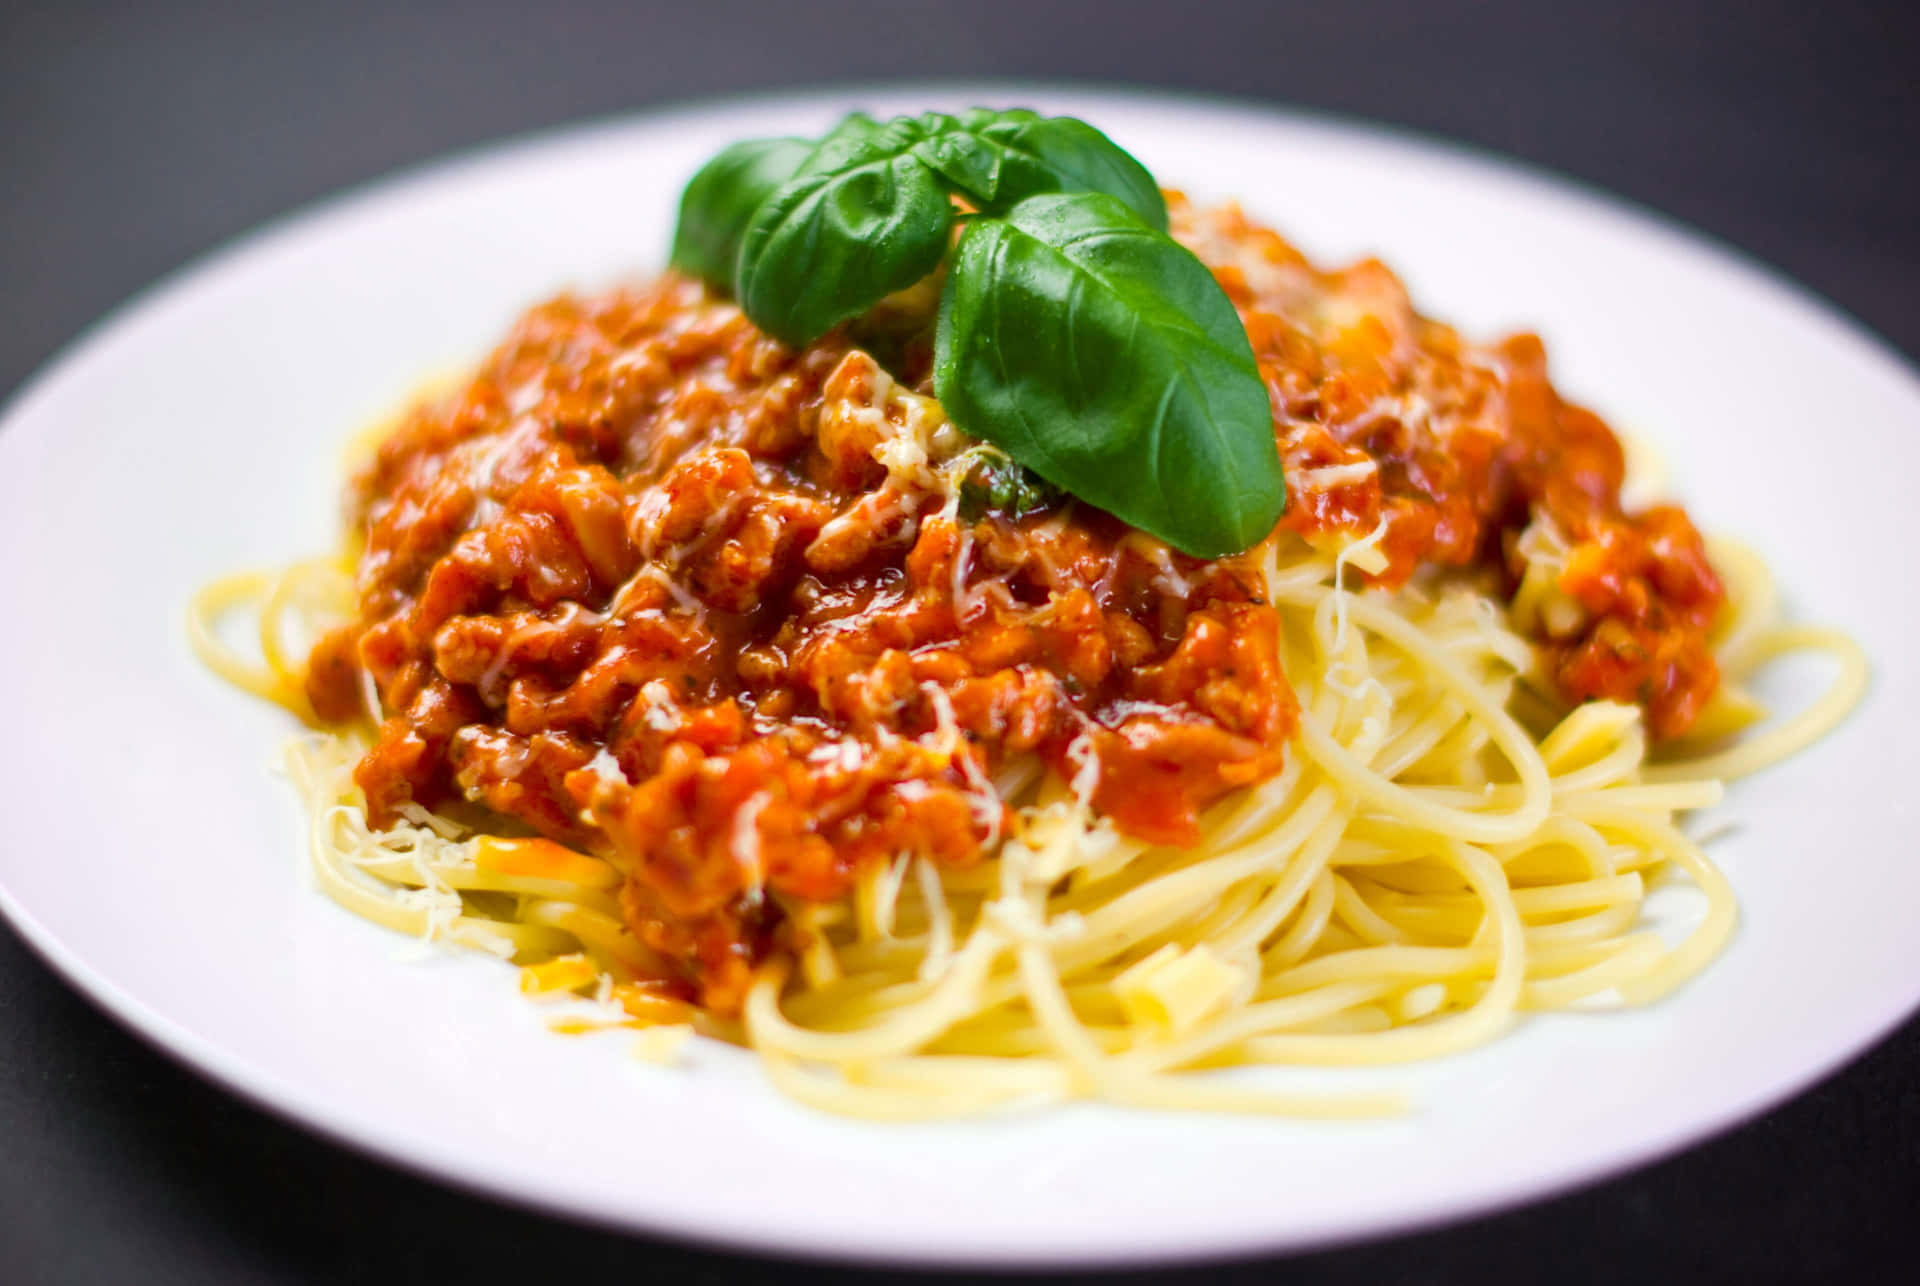 Enjoy a flavorful bowl of delicious homemade spaghetti Wallpaper